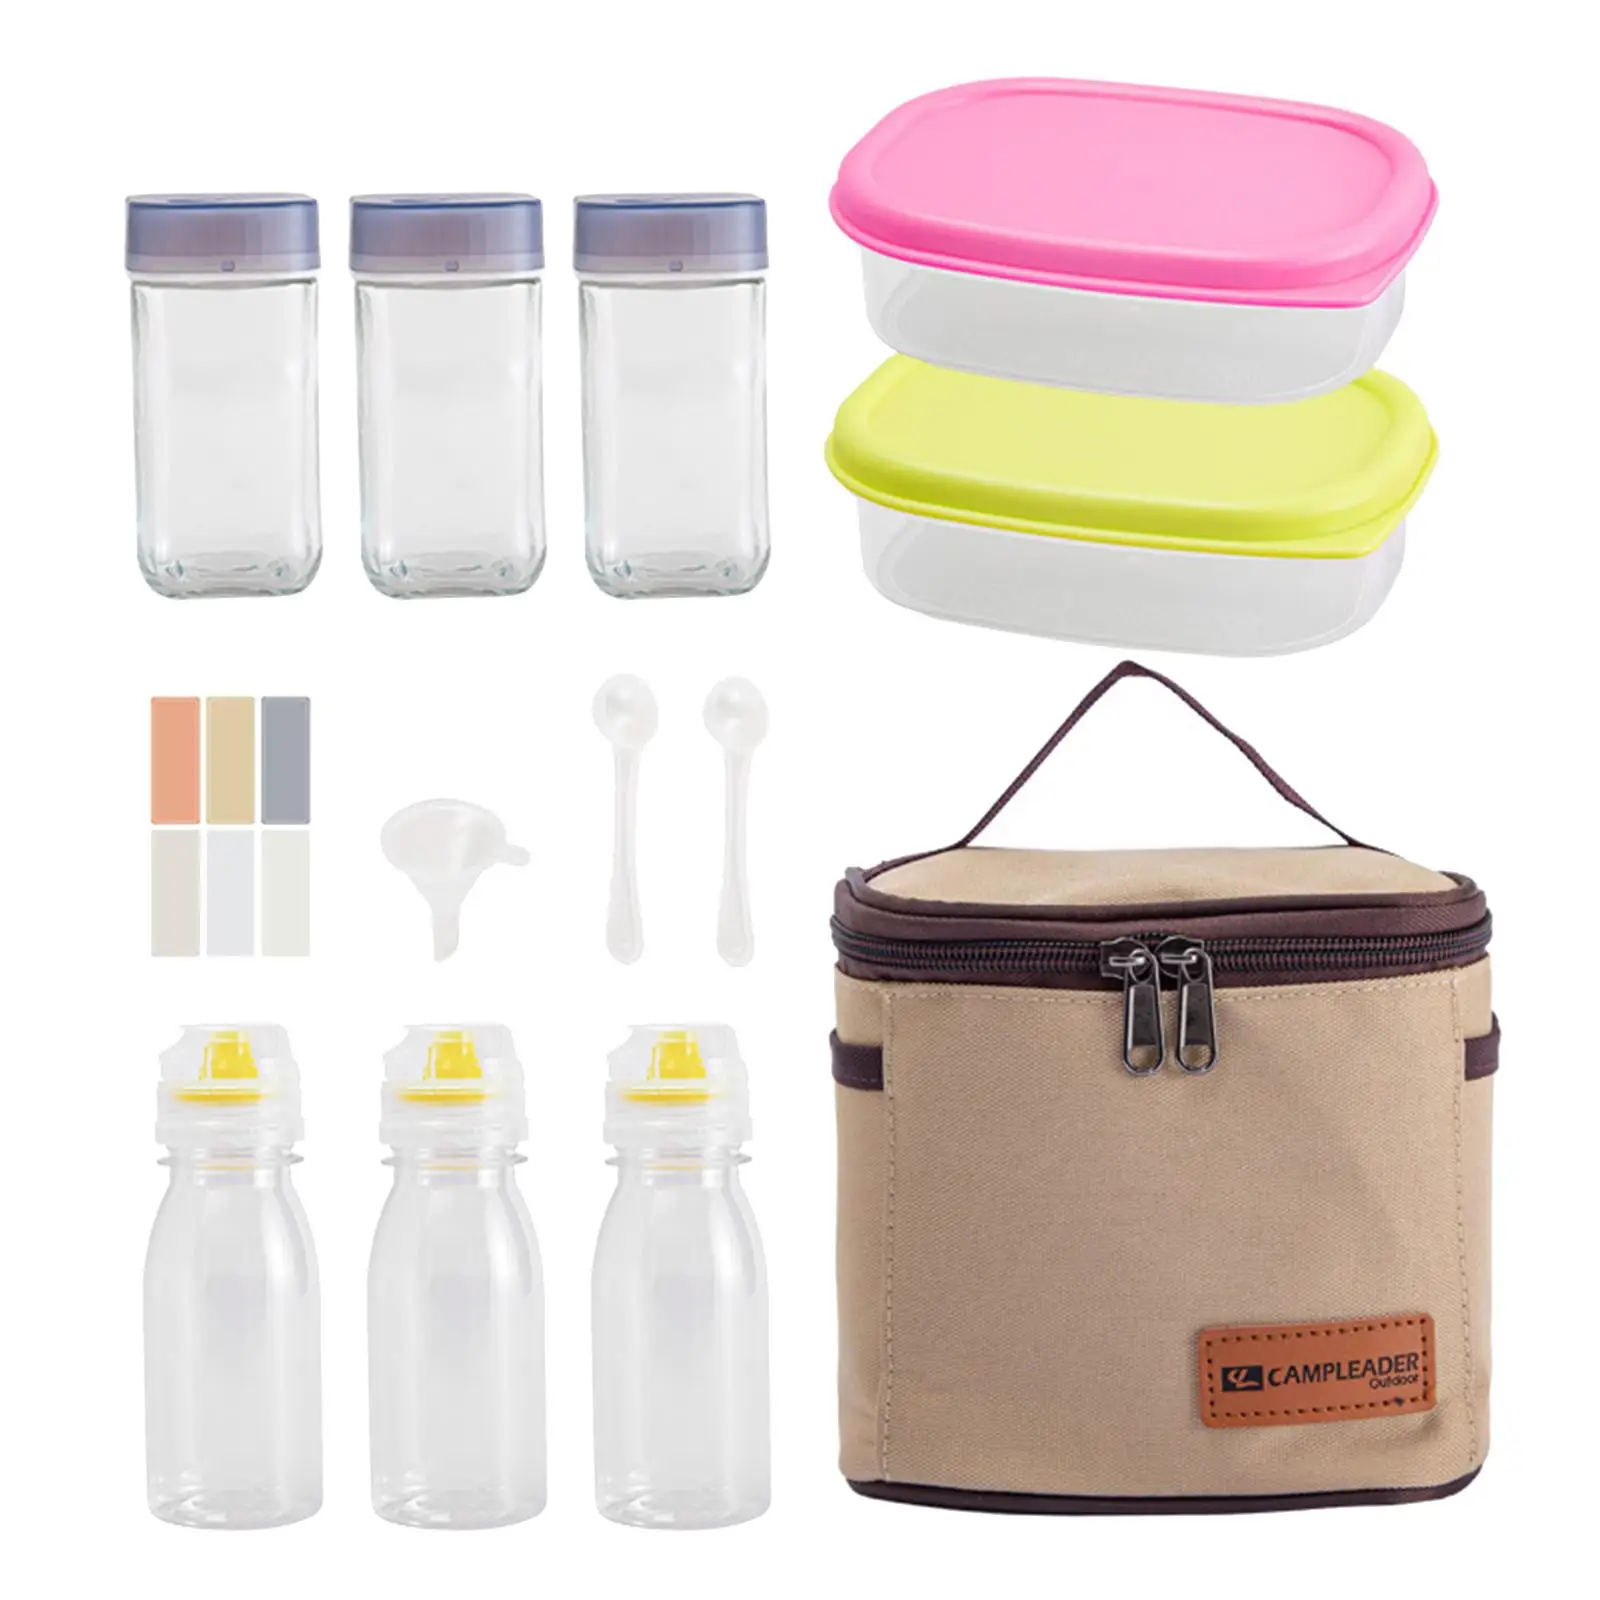 Portable Camping Spice Jars Sauce Condiment Containers Set with Carrying Bag for Fishing Picnic